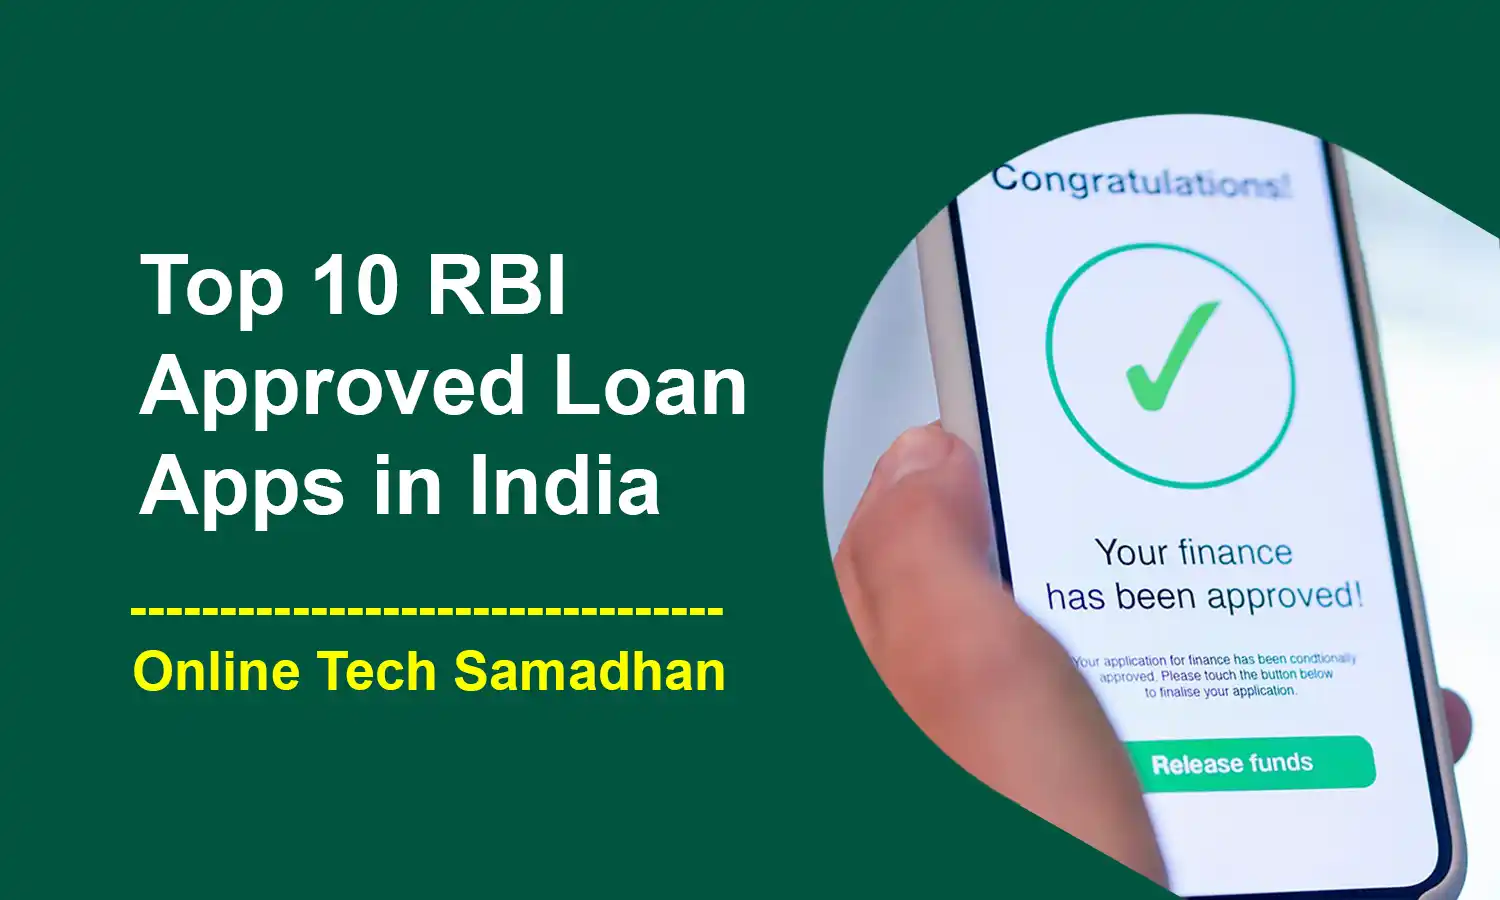 RBI Approved Loan Apps in India